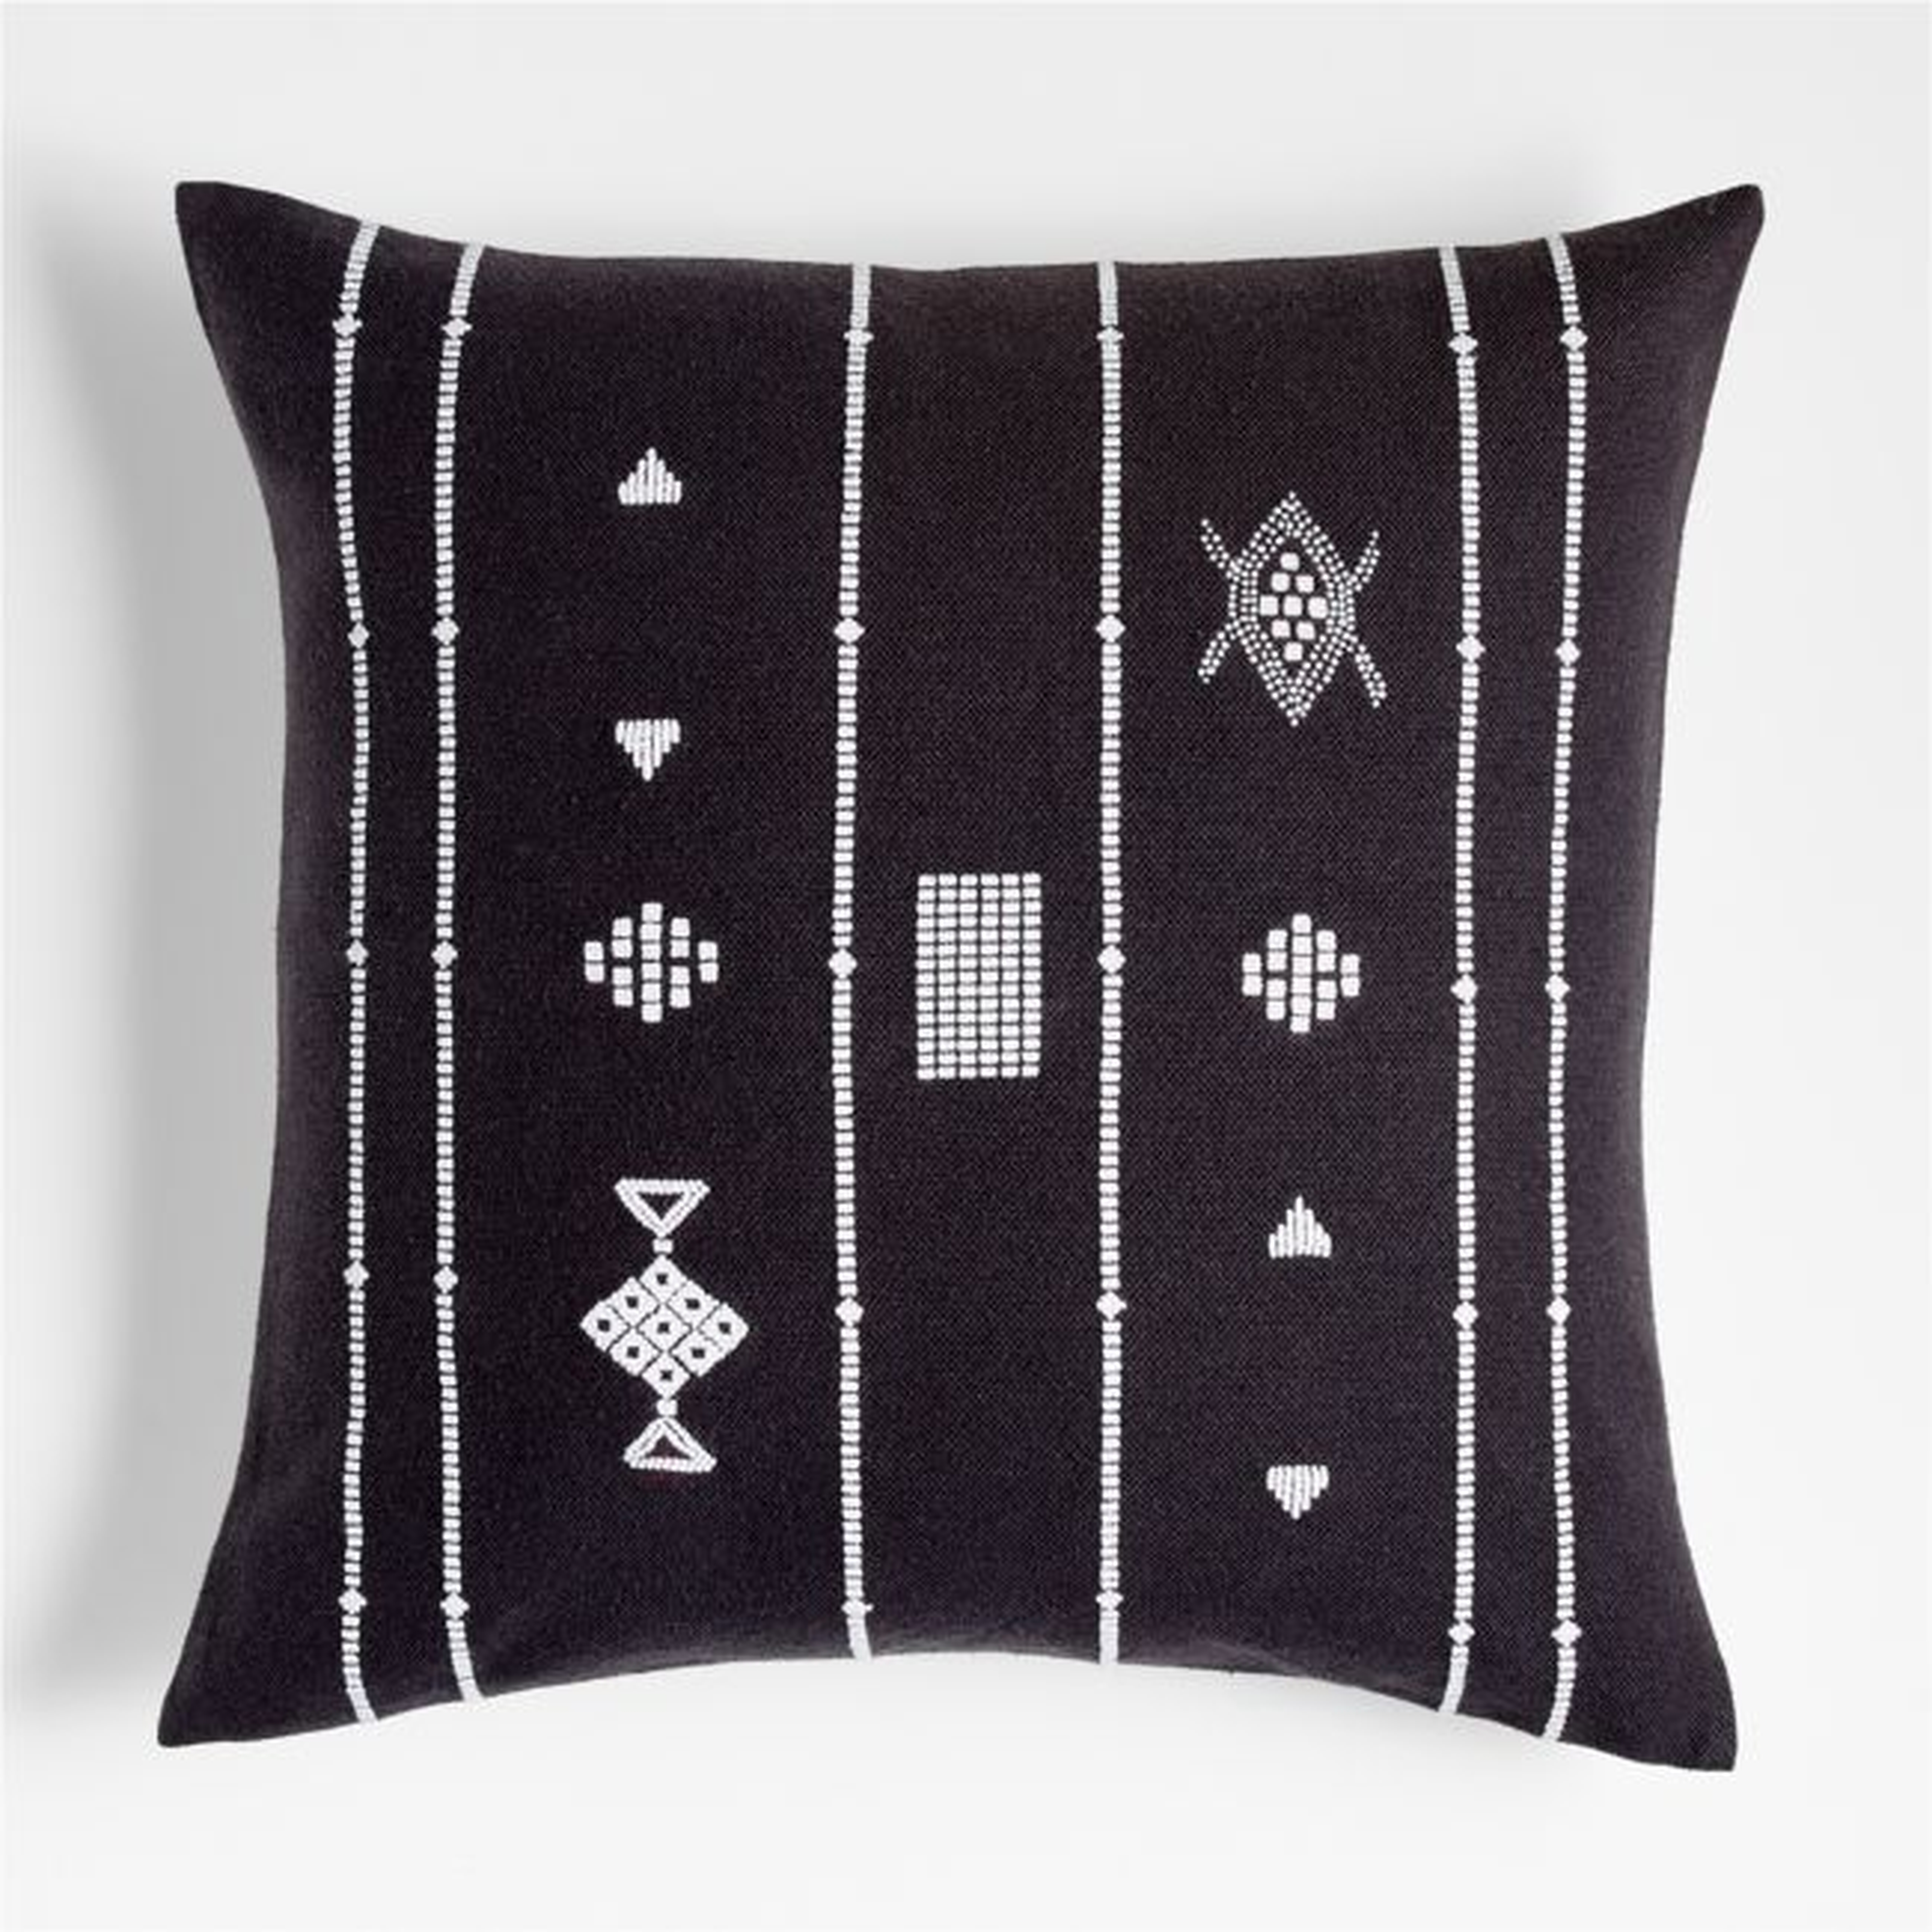 Yacon 23"x23" Embroidered Black and White Throw Pillow with Down-Alternative Insert - Crate and Barrel